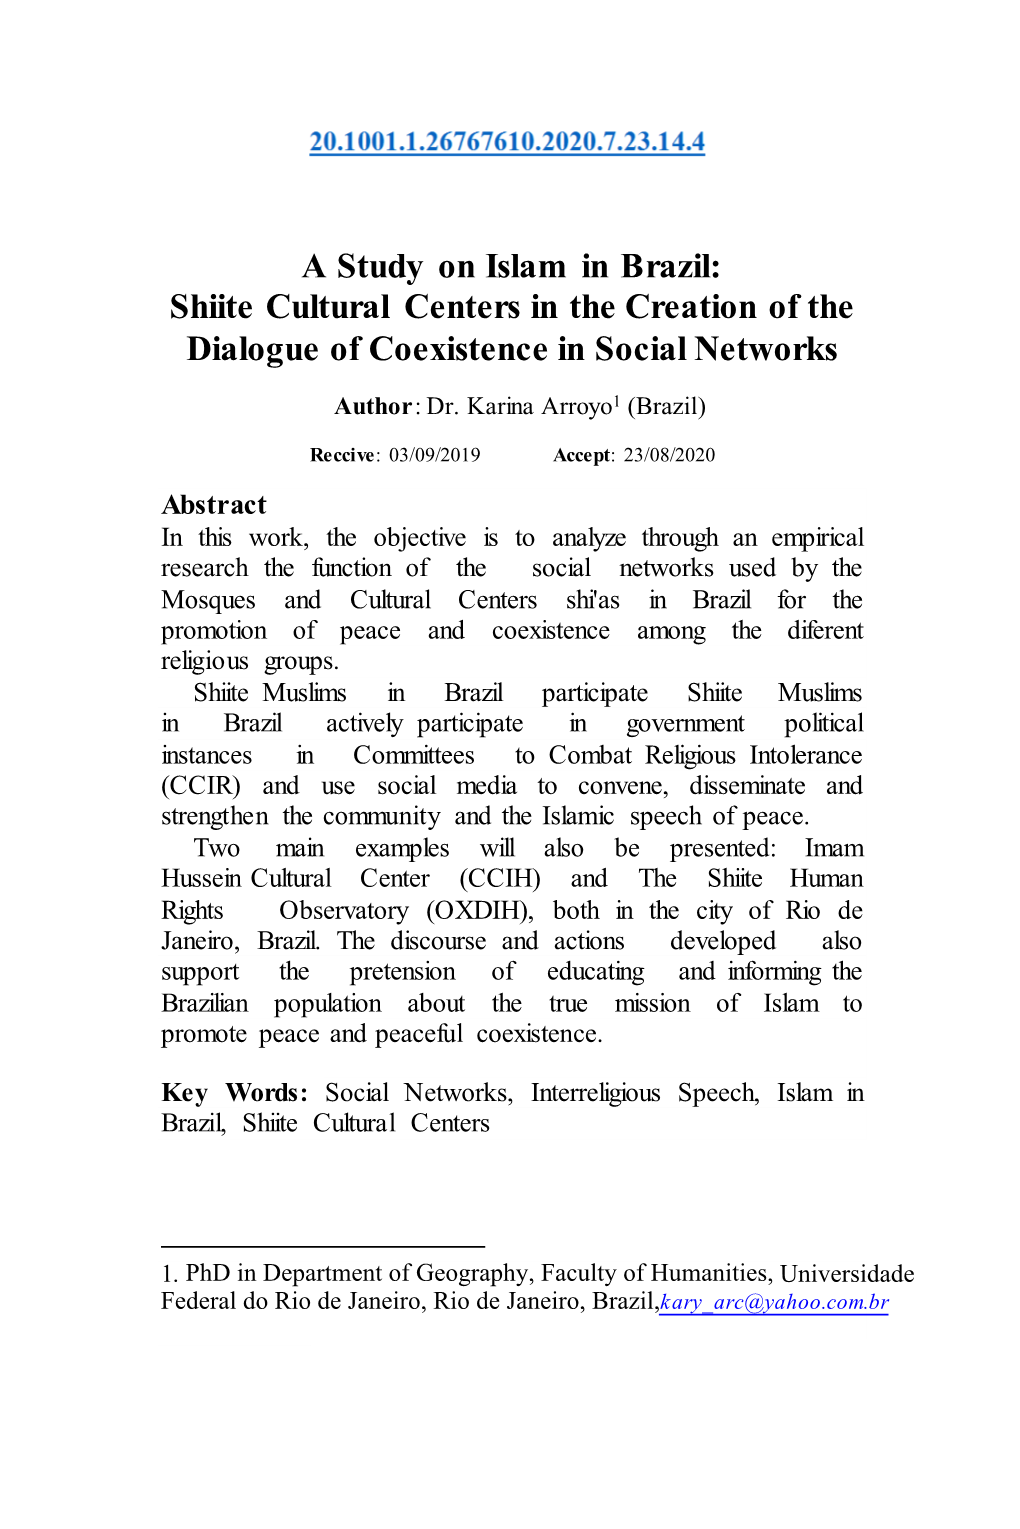 A Study on Islam in Brazil: Shiite Cultural Centers in the Creation of the Dialogue of Coexistence in Social Networks